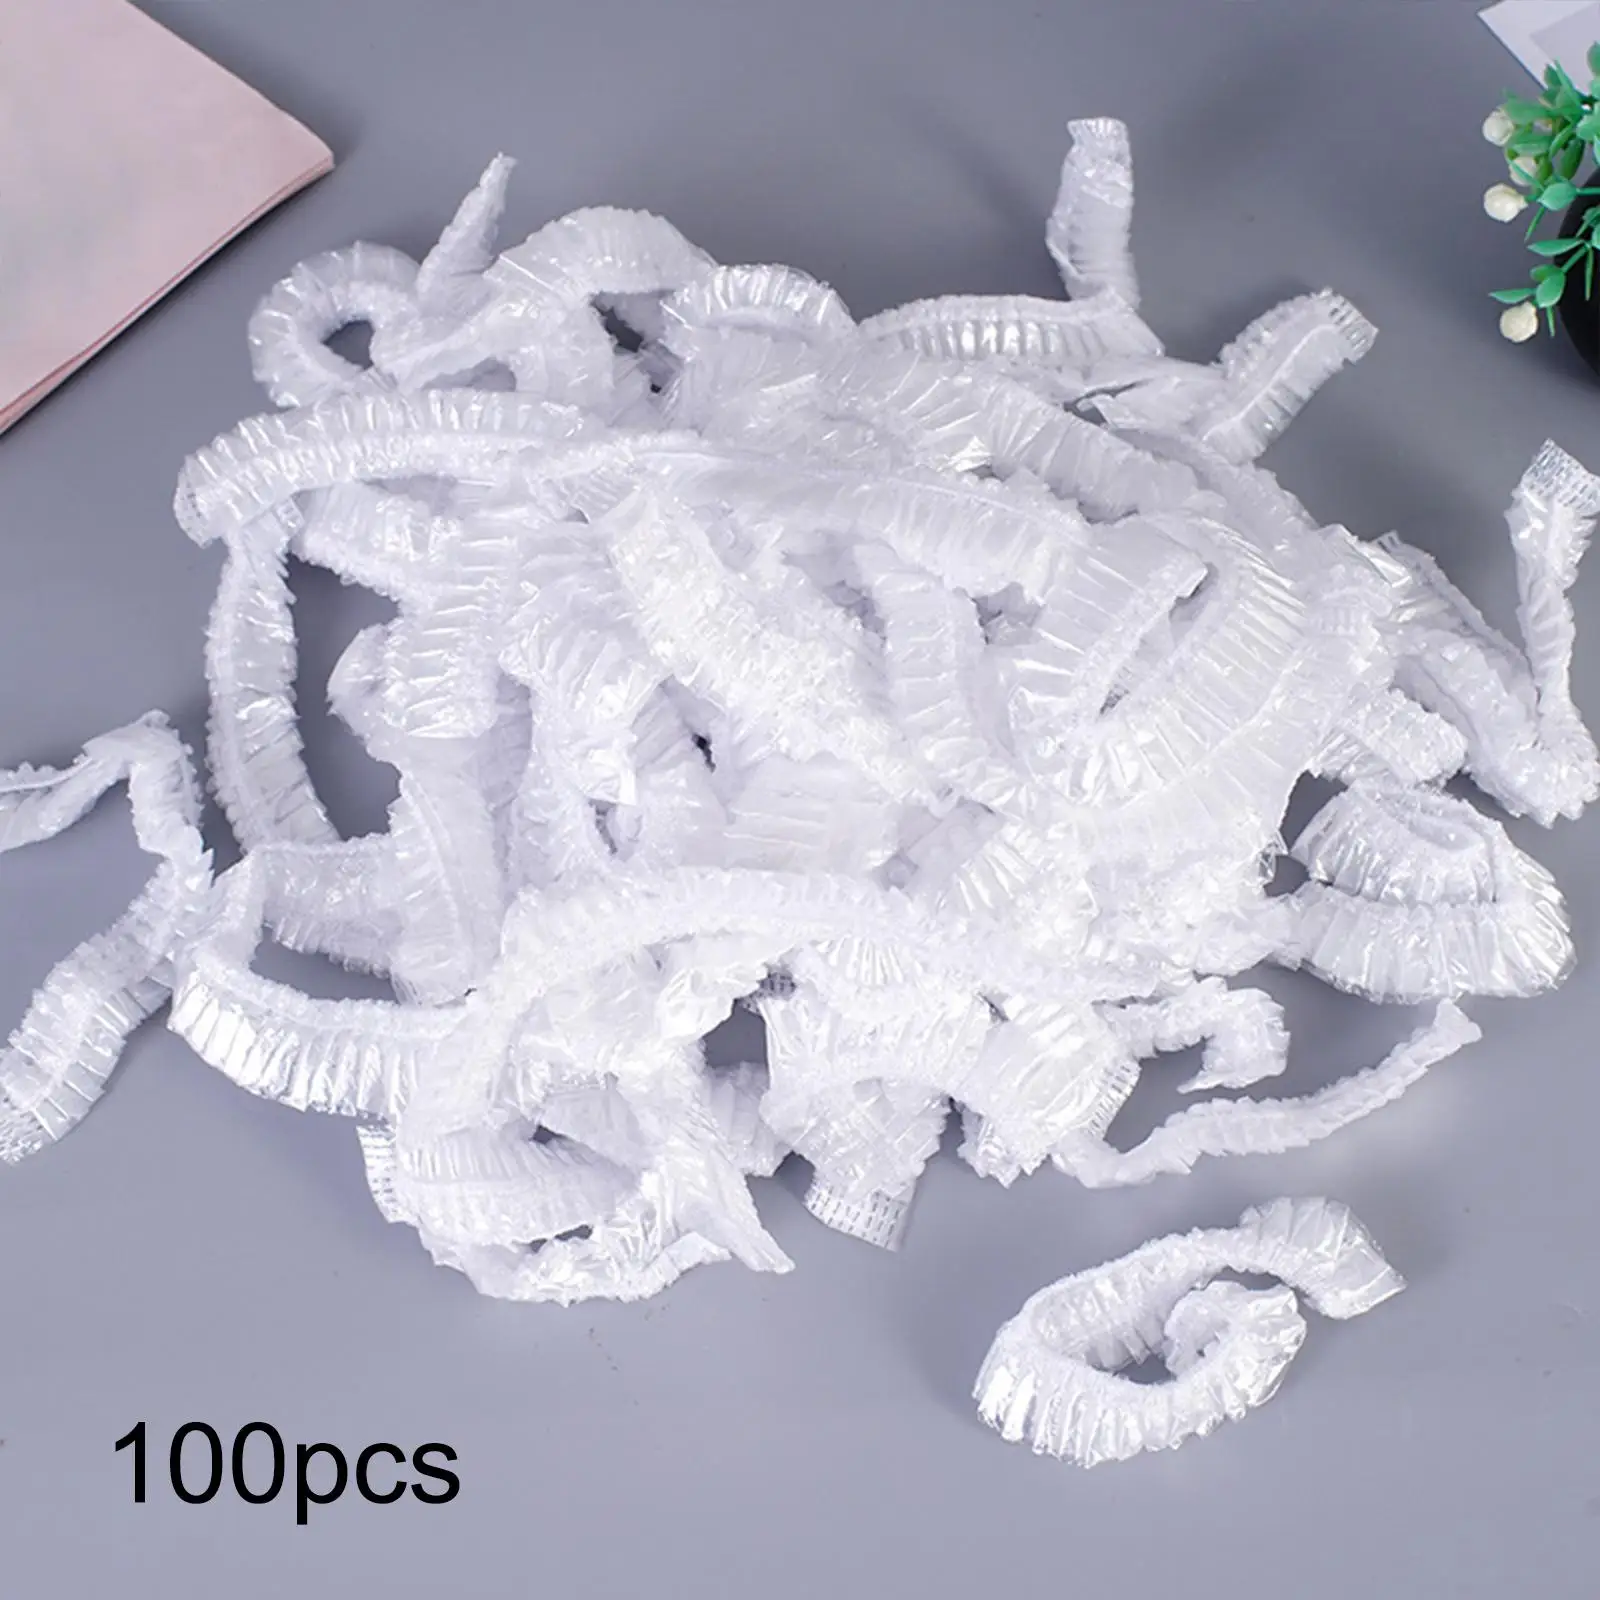 100Pcs Disposable Shower Caps Multipurpose White Waterproof Hair Caps Bath Caps for Home SPA Bathing Conditioning Unisex Adults